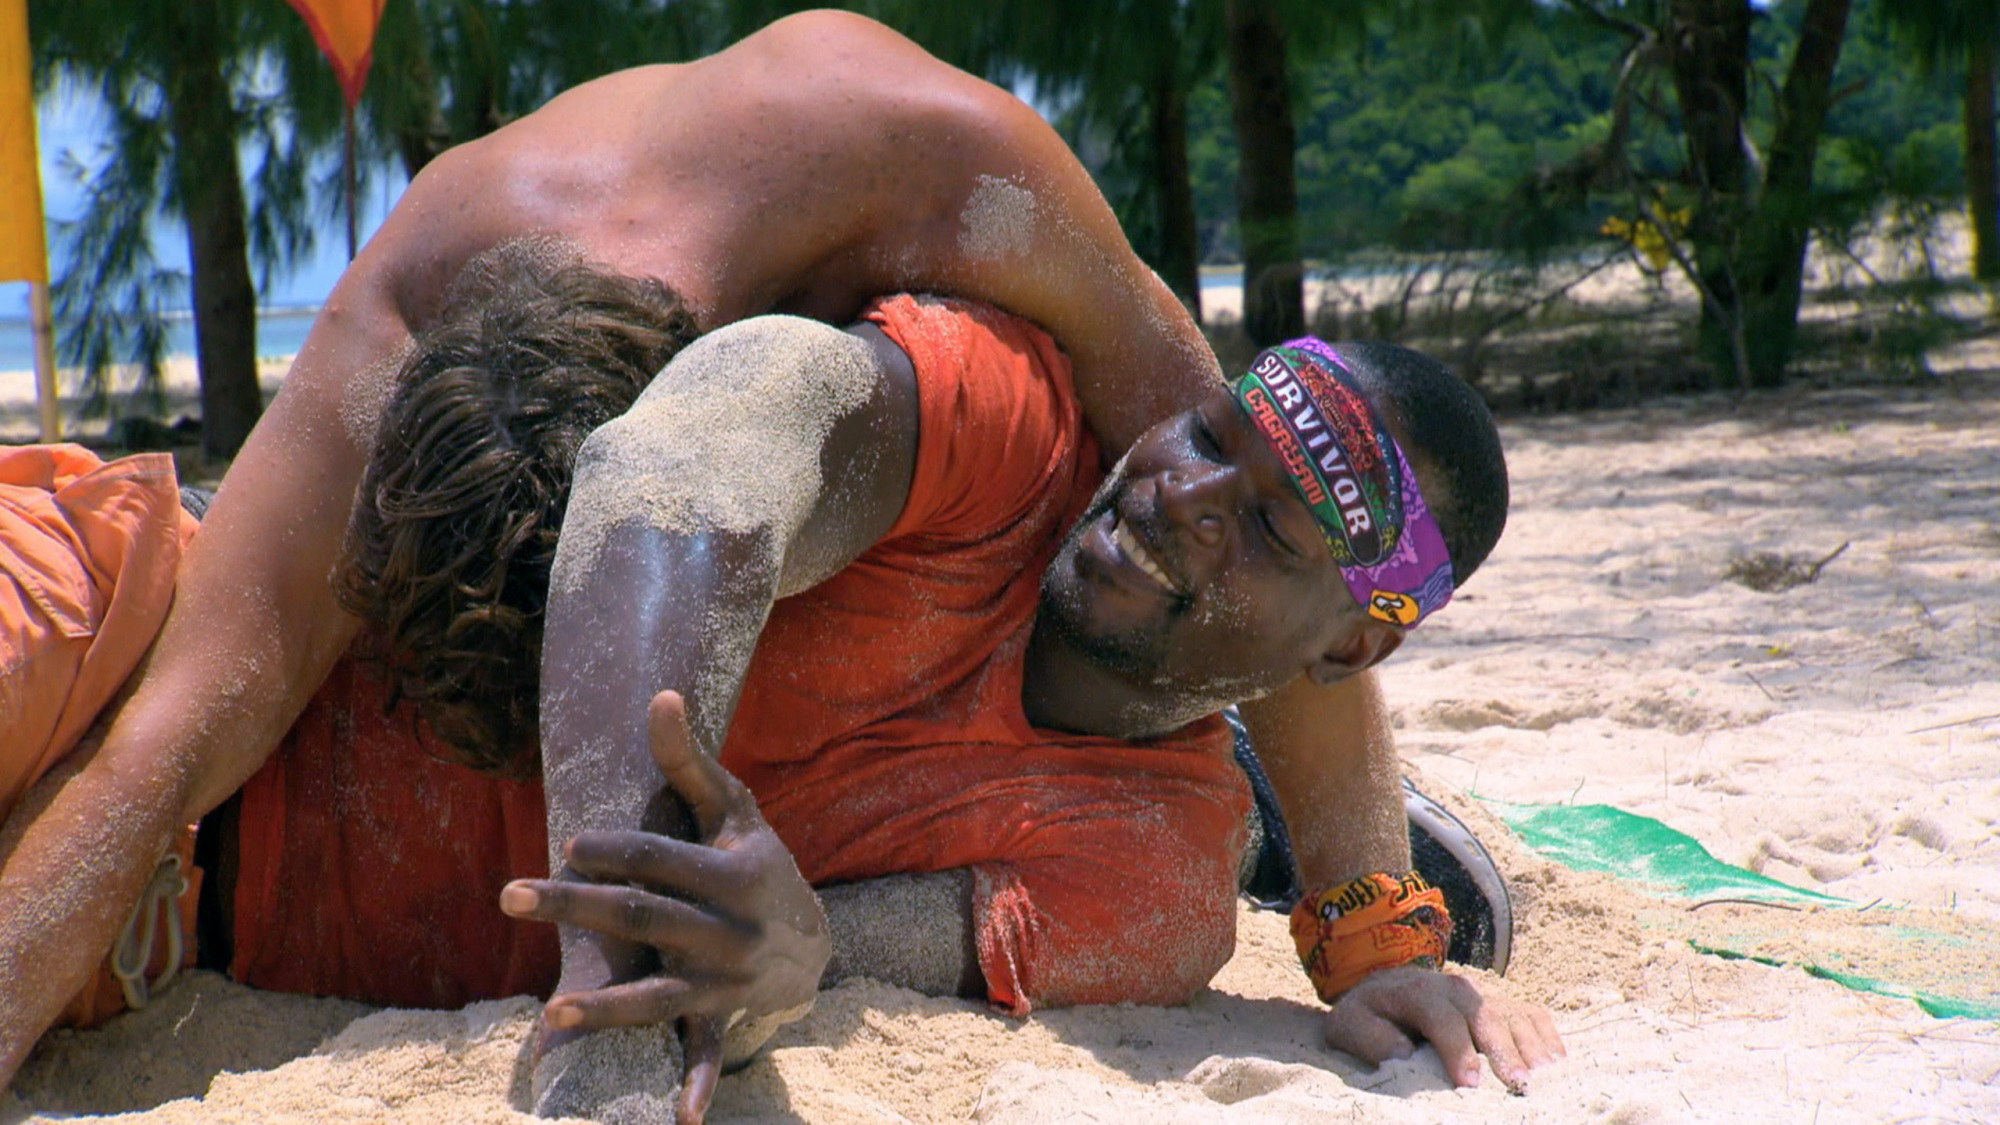 Cliff Robinson wrestles in the sand